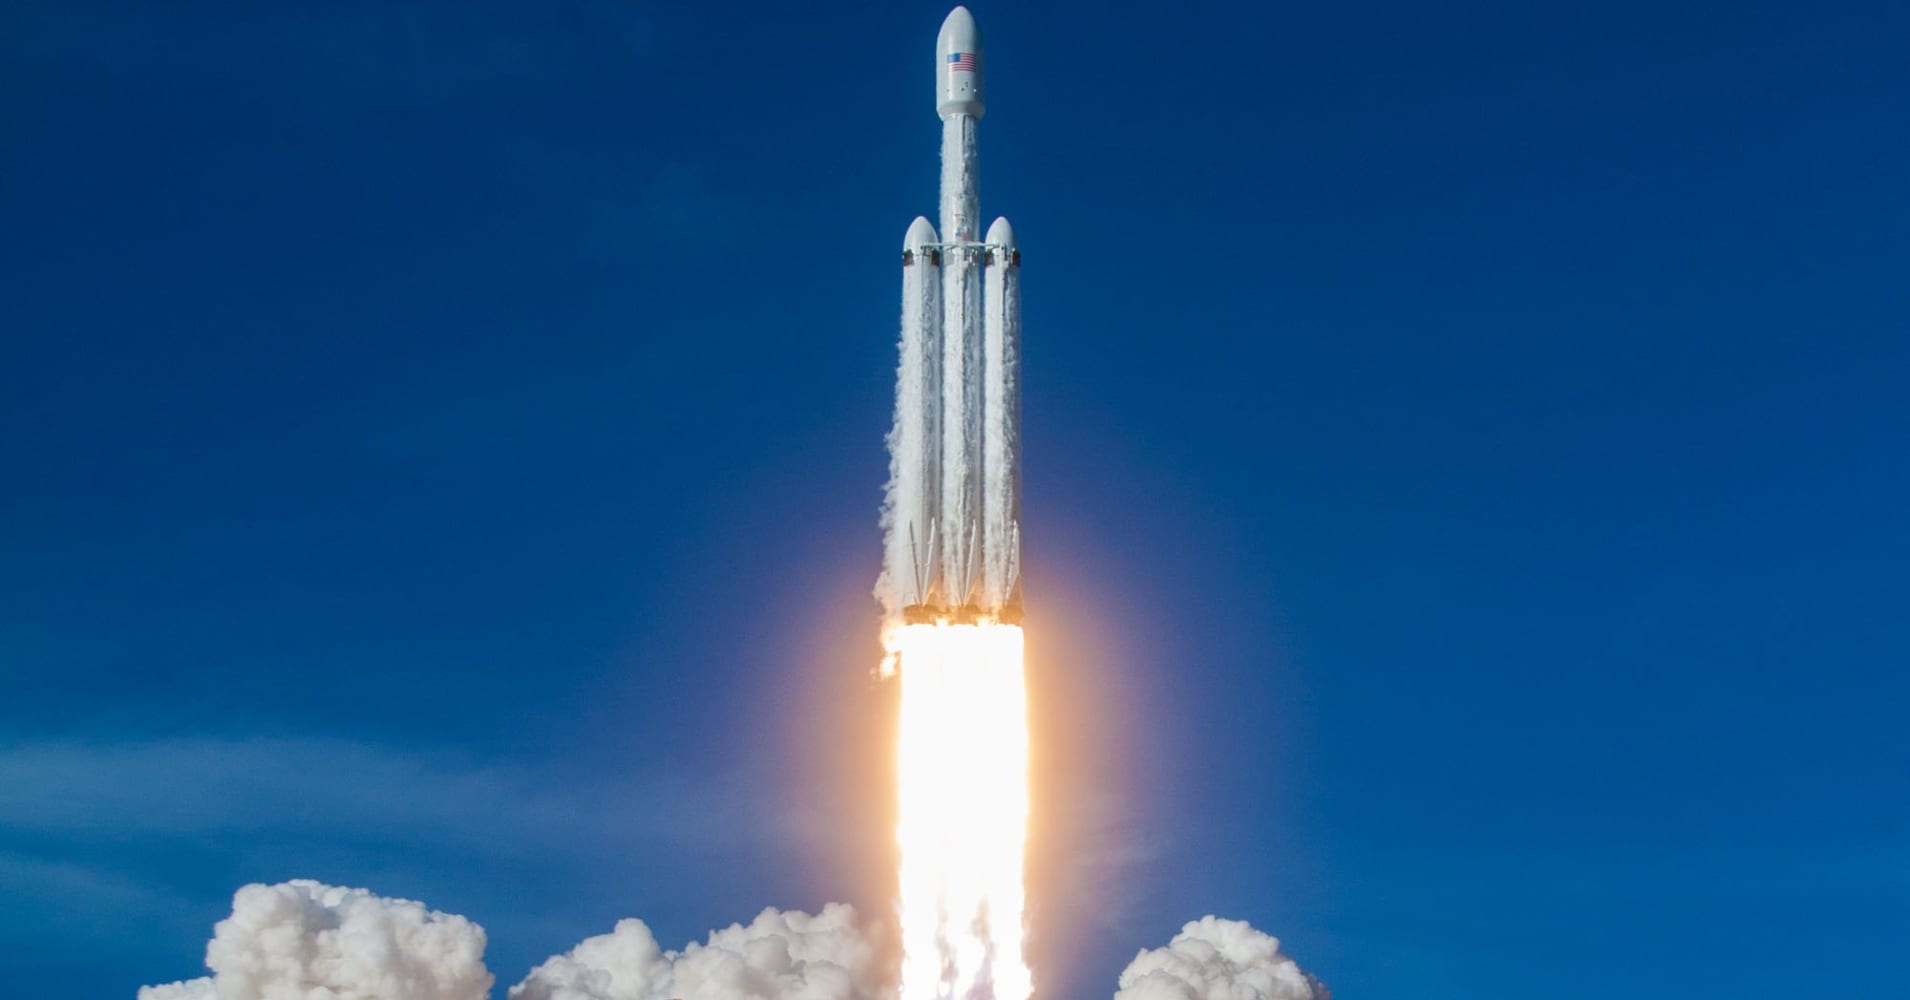 Livestream: Watch SpaceX Falcon Heavy rocket launch and landing